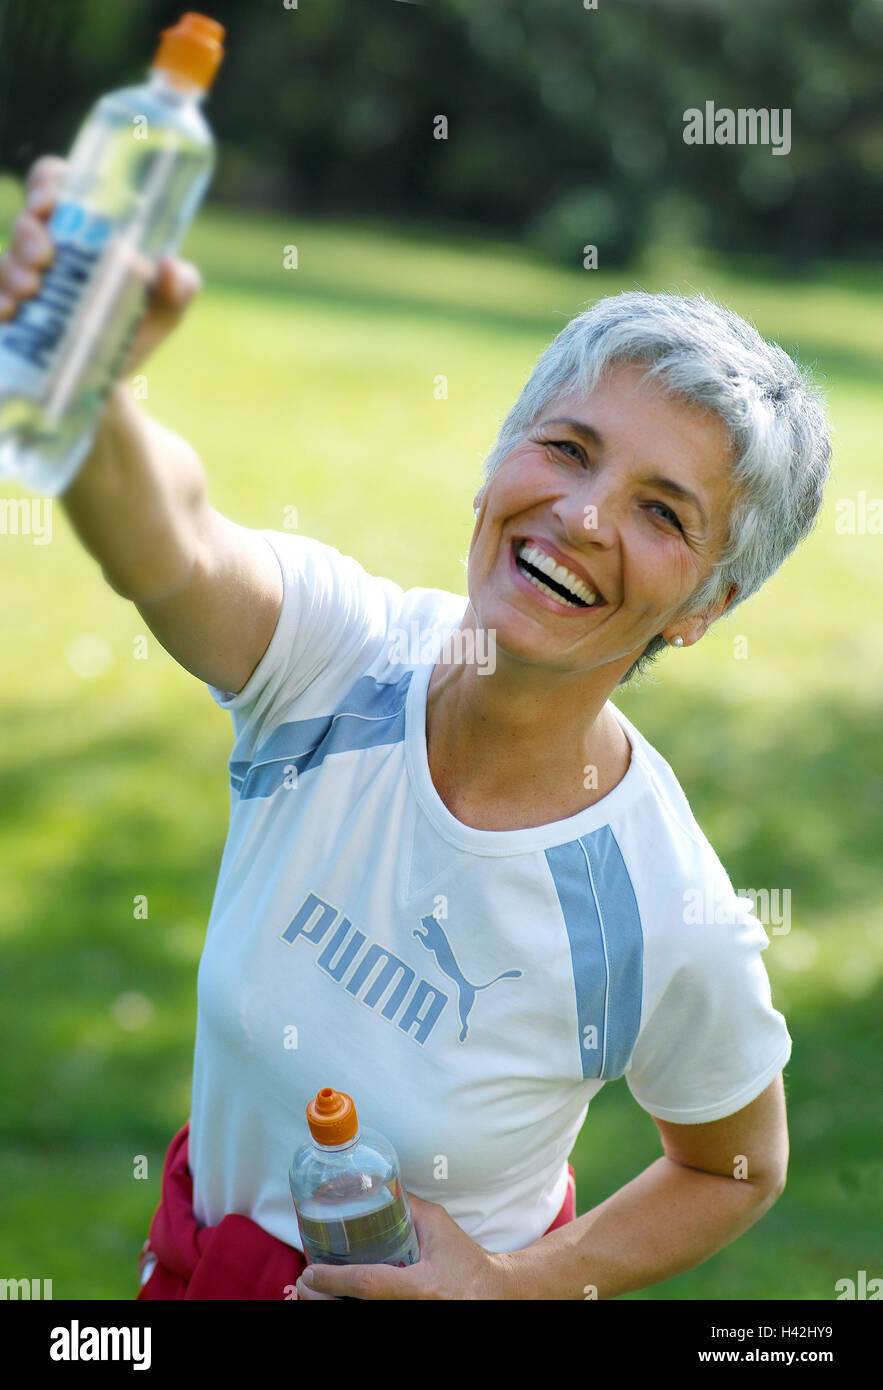 Senior, sportily, water flasks, hold, point, laugh, half portrait, 50-60 years, woman, sportswoman, rest, disengage, rest, water flask, mineral water, water, thirst, Durstlöscher, drink, alcohol-free, balance, happily, cheerfulness, tuning positively, amusements, fitness, activity, sport, leisure time, hobby, summer, outside Stock Photo